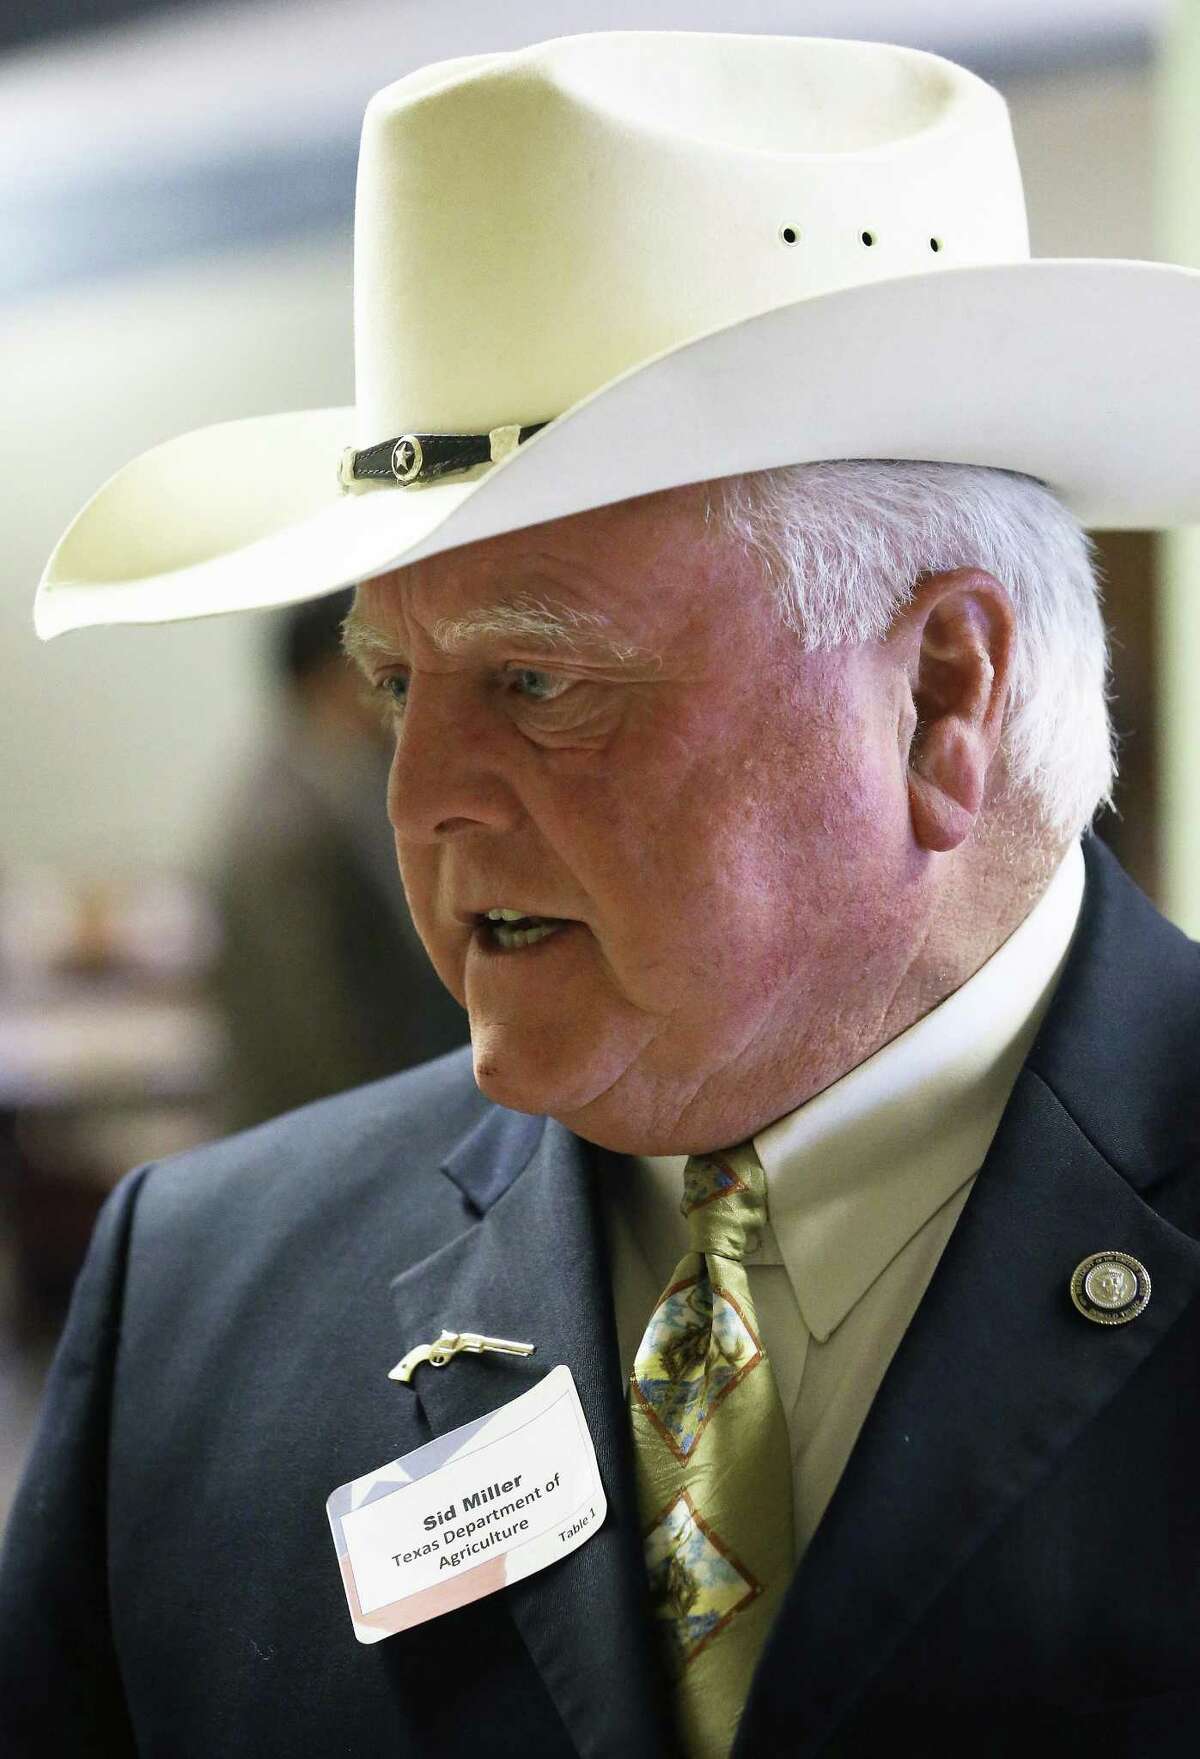 Agriculture Commissioner Sid Miller has approved Kaput Feral Hog Lure, a pesticide that contains warfarin, to cut down on a hog population that has gotten out of control in Texas and other states.